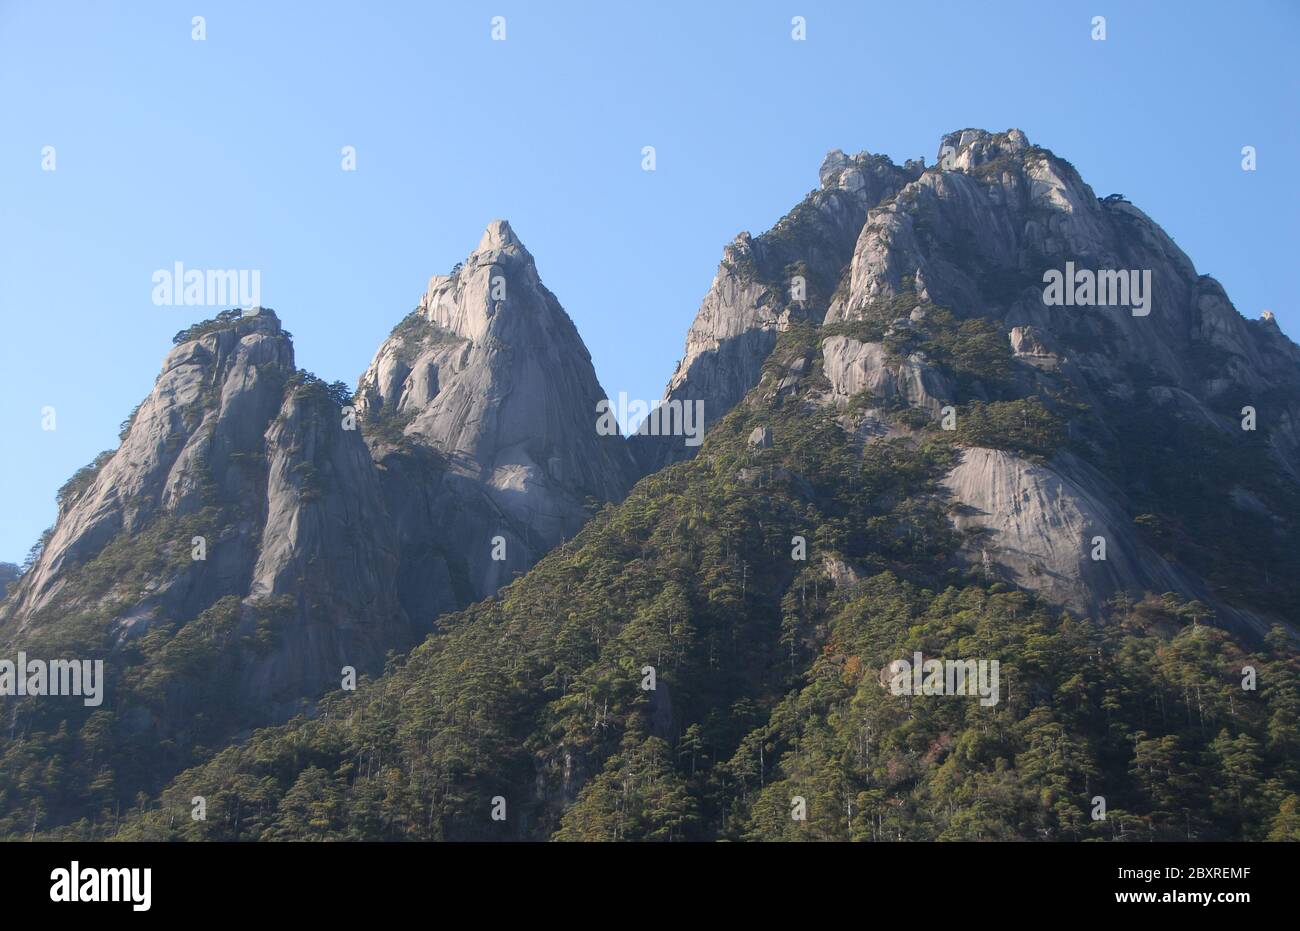 Huangshan Mountain in Anhui Province, China. View of peaks and trees as seen from the eastern steps. Huangshan is famous for its rocky peaks. Stock Photo